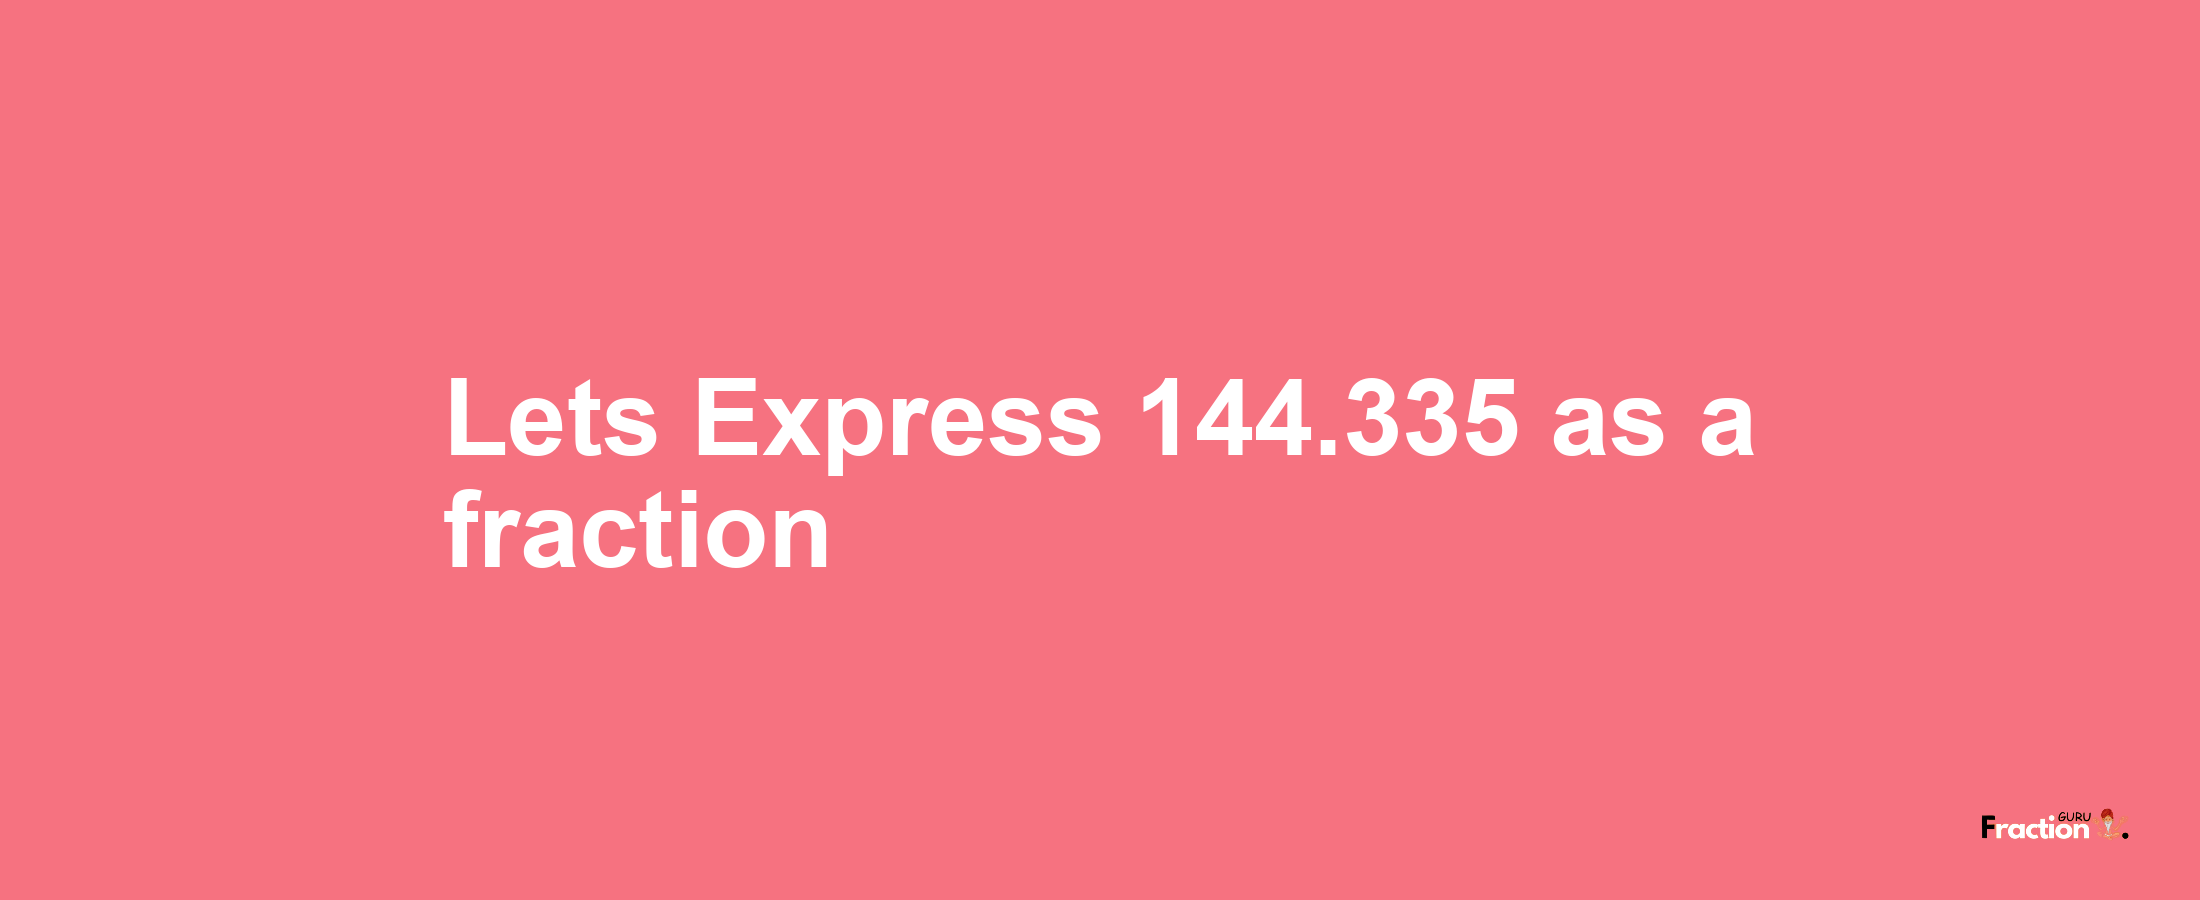 Lets Express 144.335 as afraction